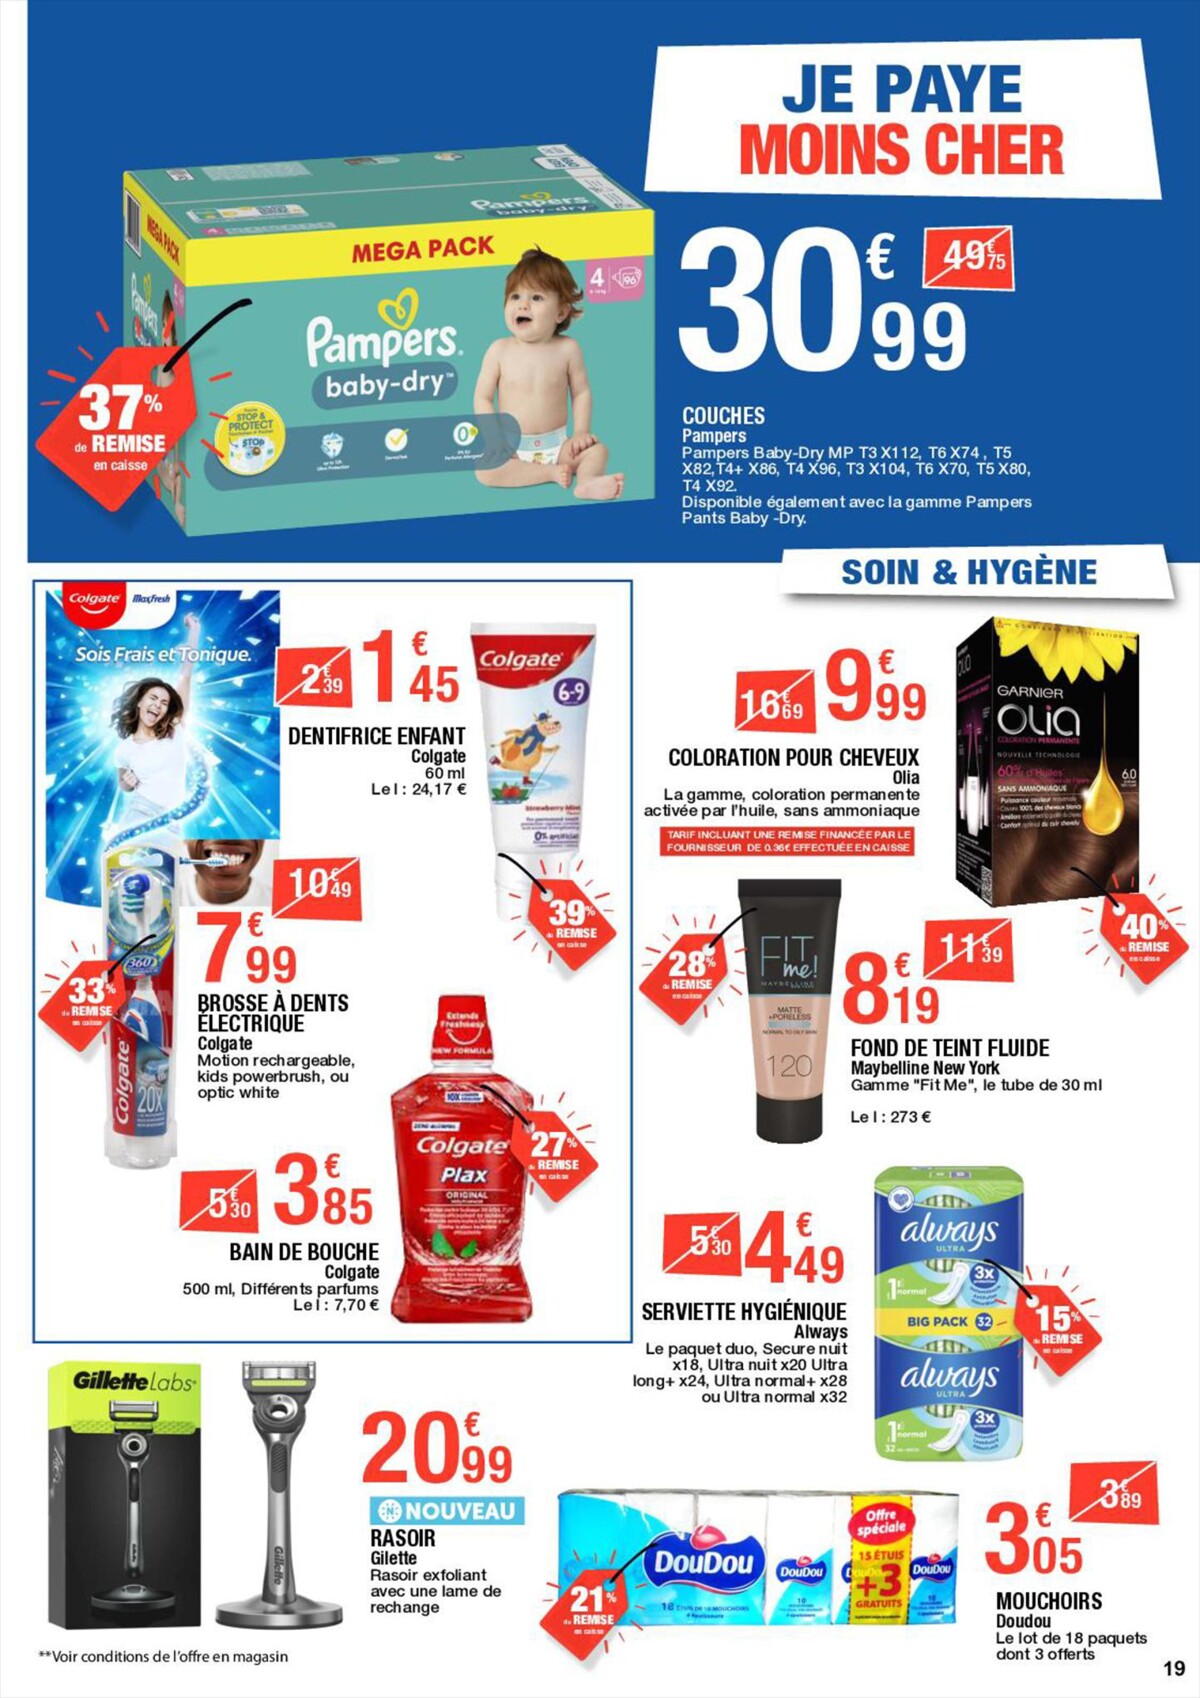 Catalogue Carrefour Special MDD, page 00019